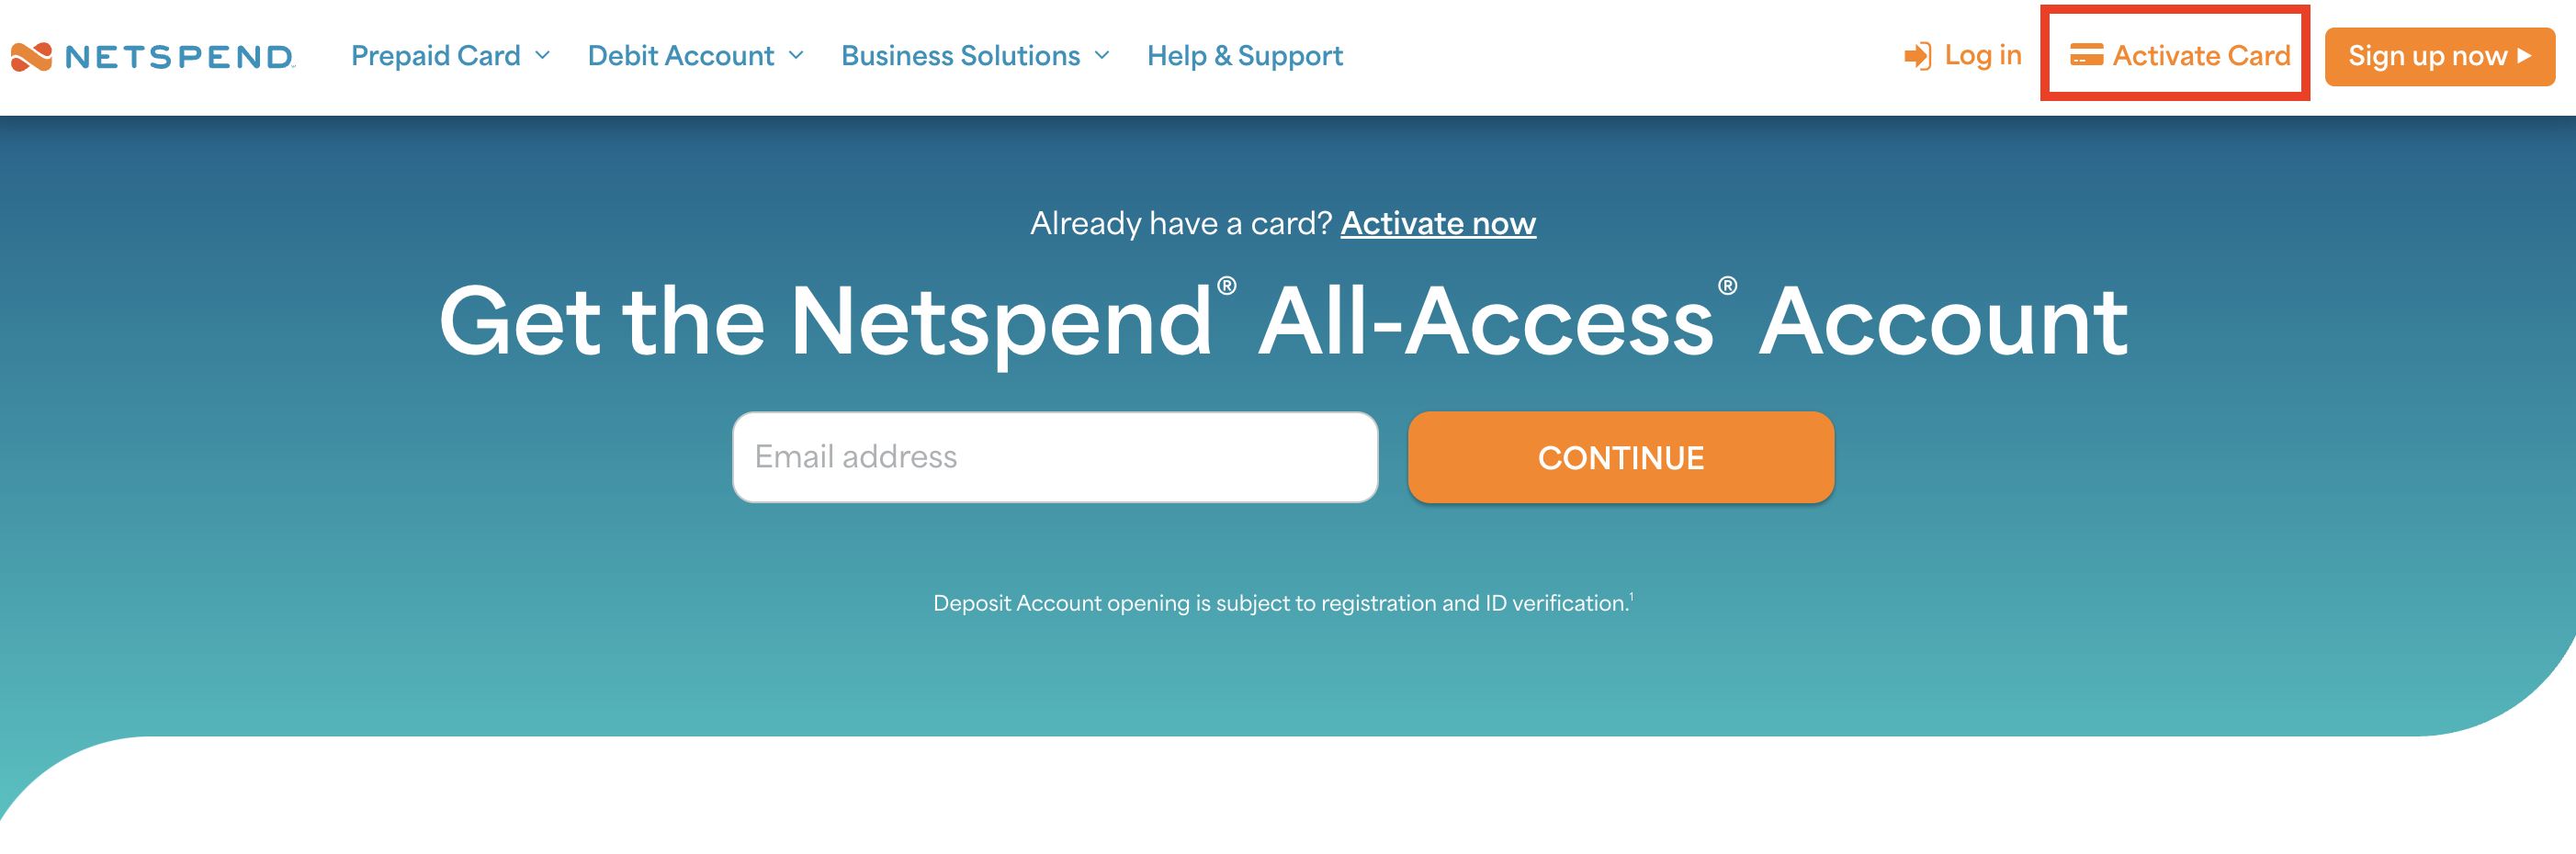 Netspend Activate Card